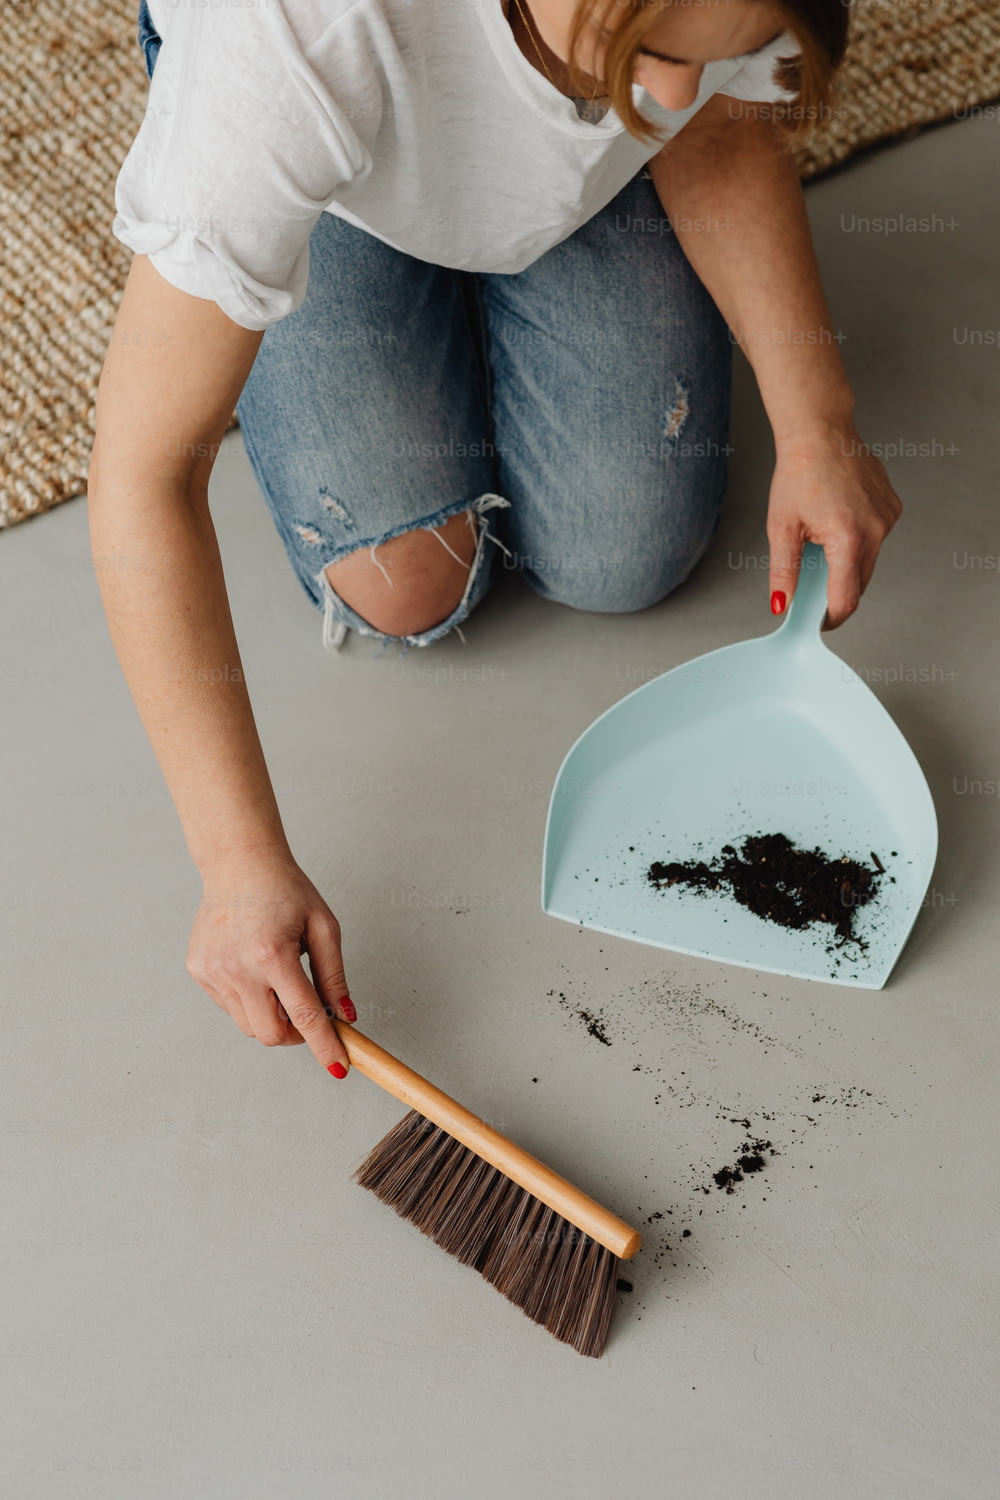 a woman kneeling on the floor with a broom and scoop of dirt